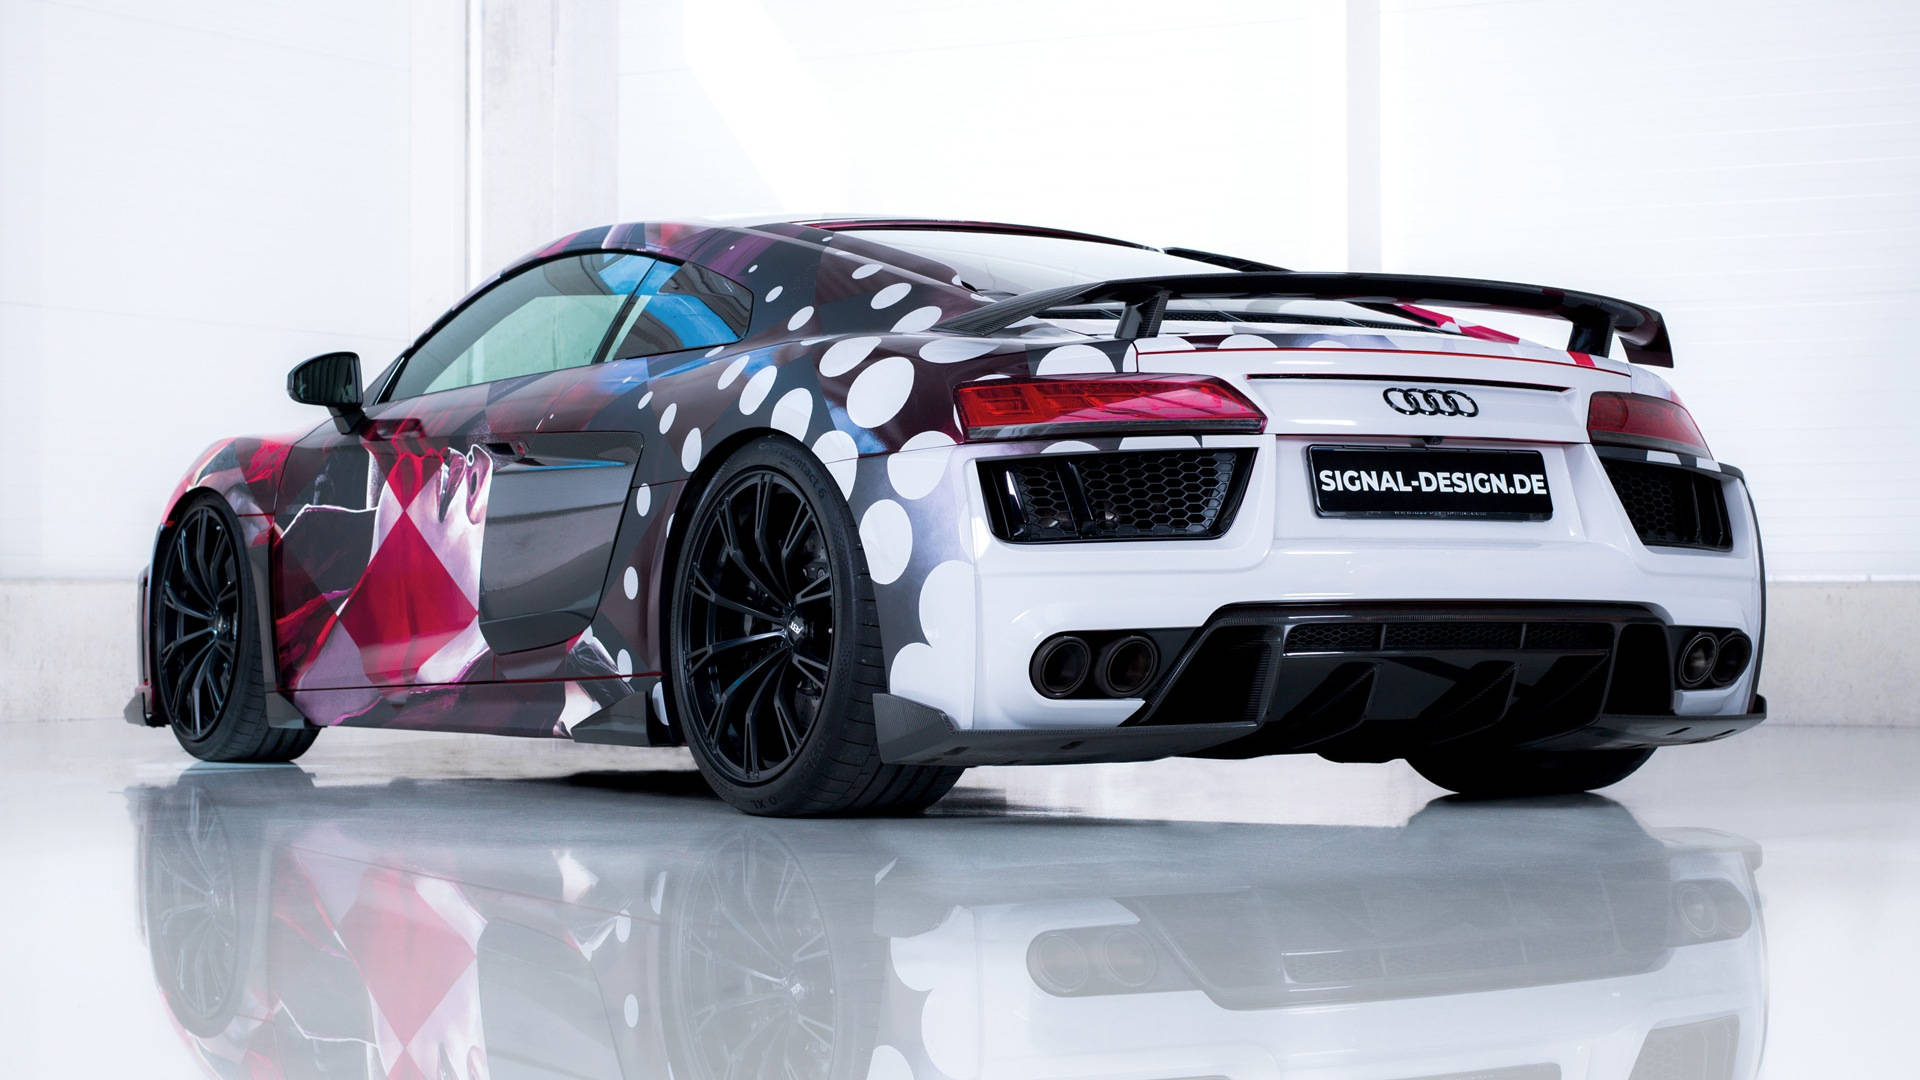 Remarkable View of Custom-Painted Audi R8 Wallpaper